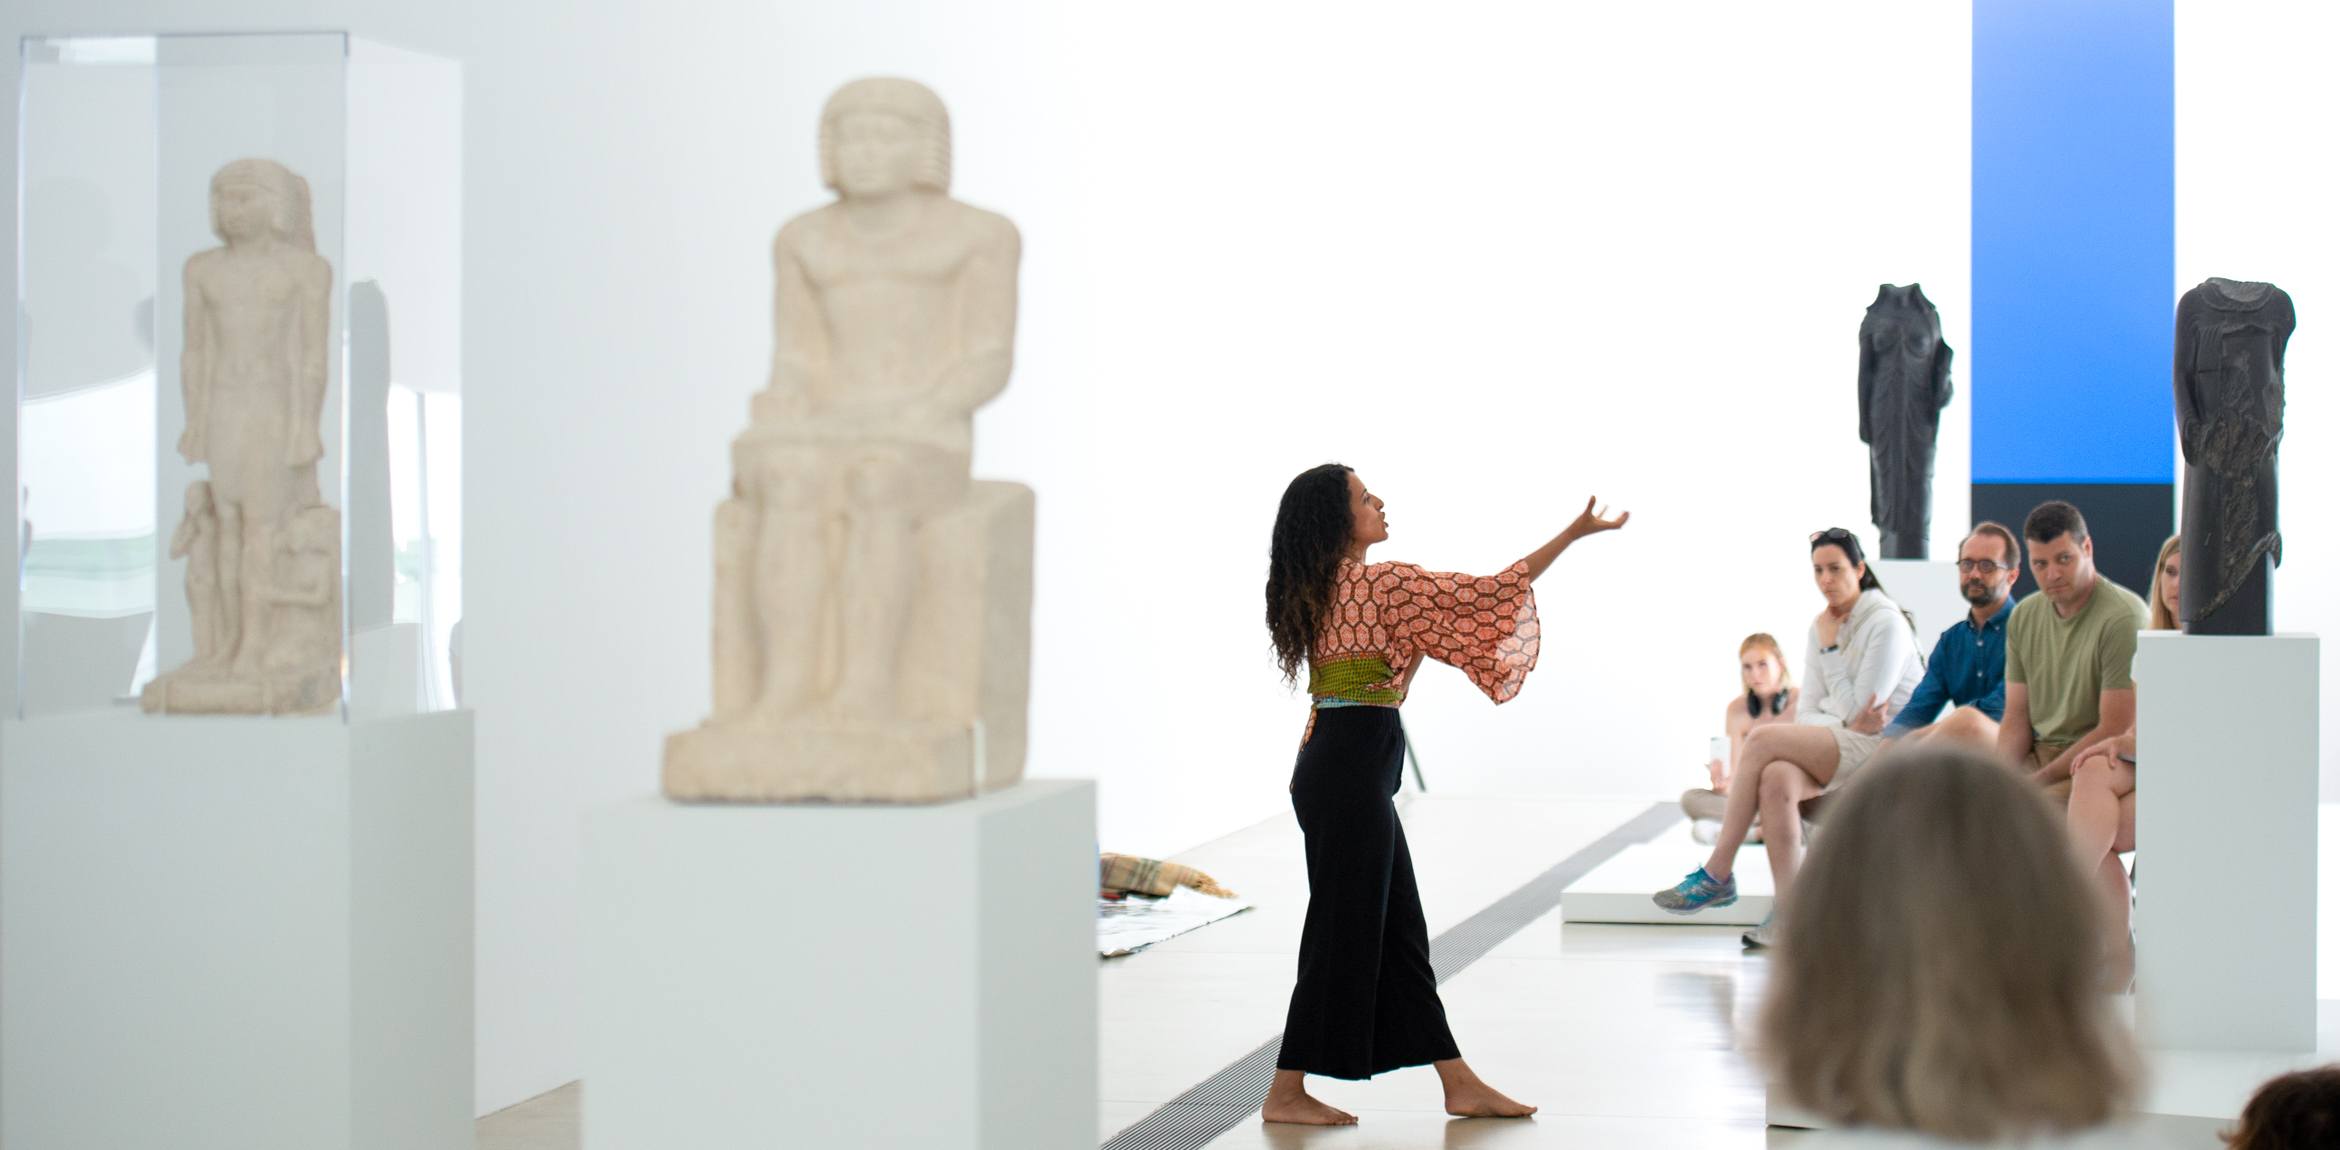 Odeya Nini performs in the Main Gallery for audience members, Egyptian statues on display.